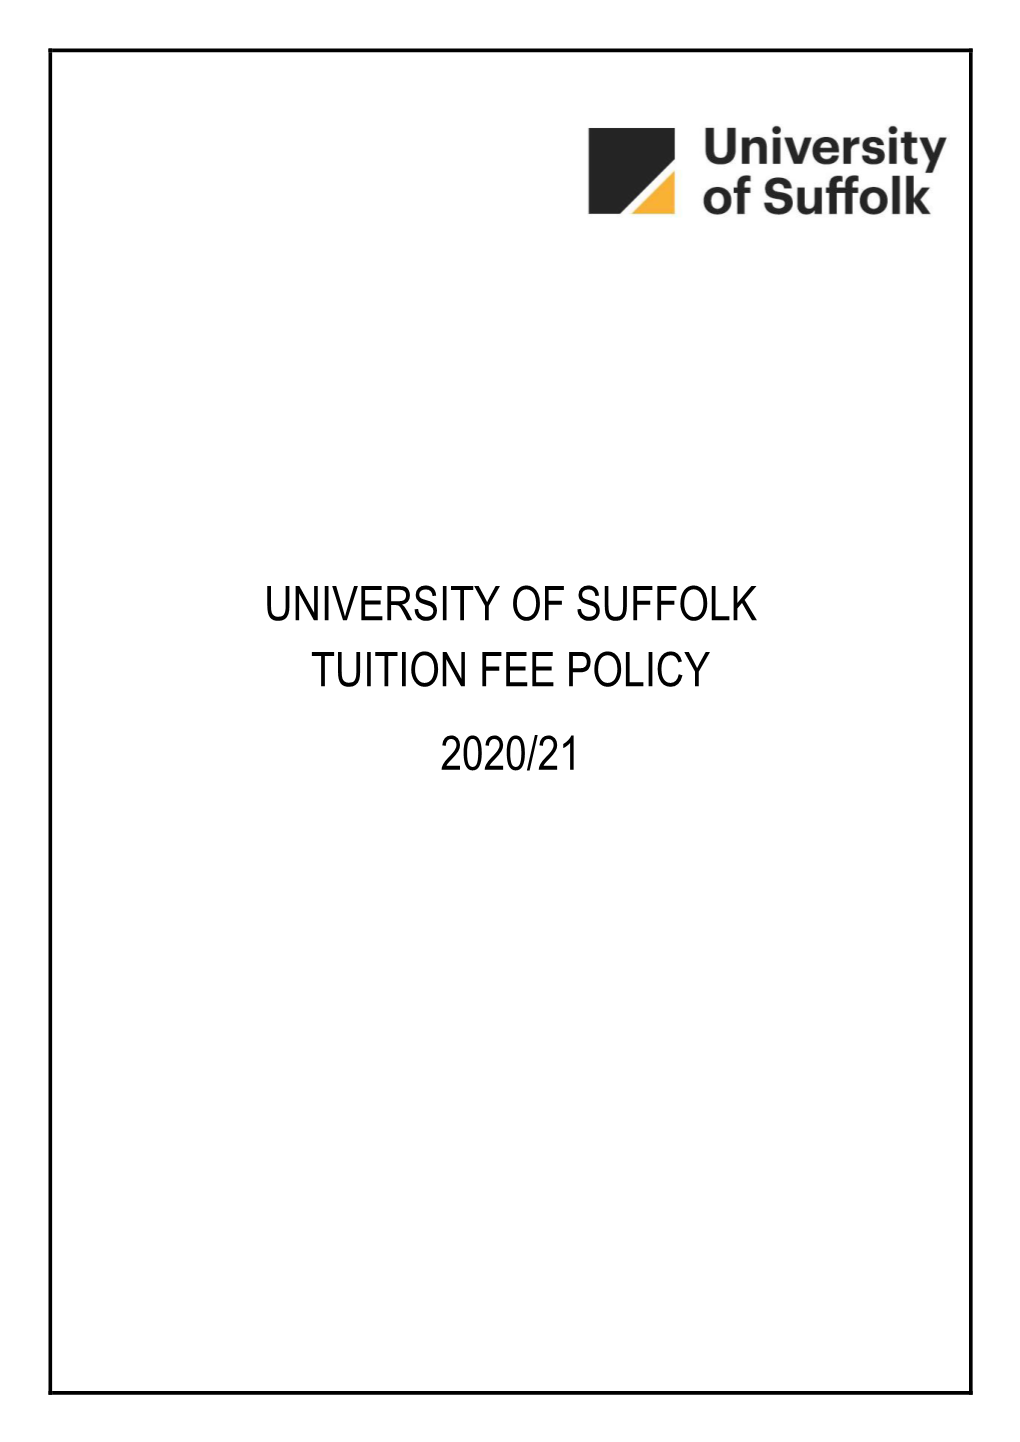 University of Suffolk Tuition Fee Policy 2020/21